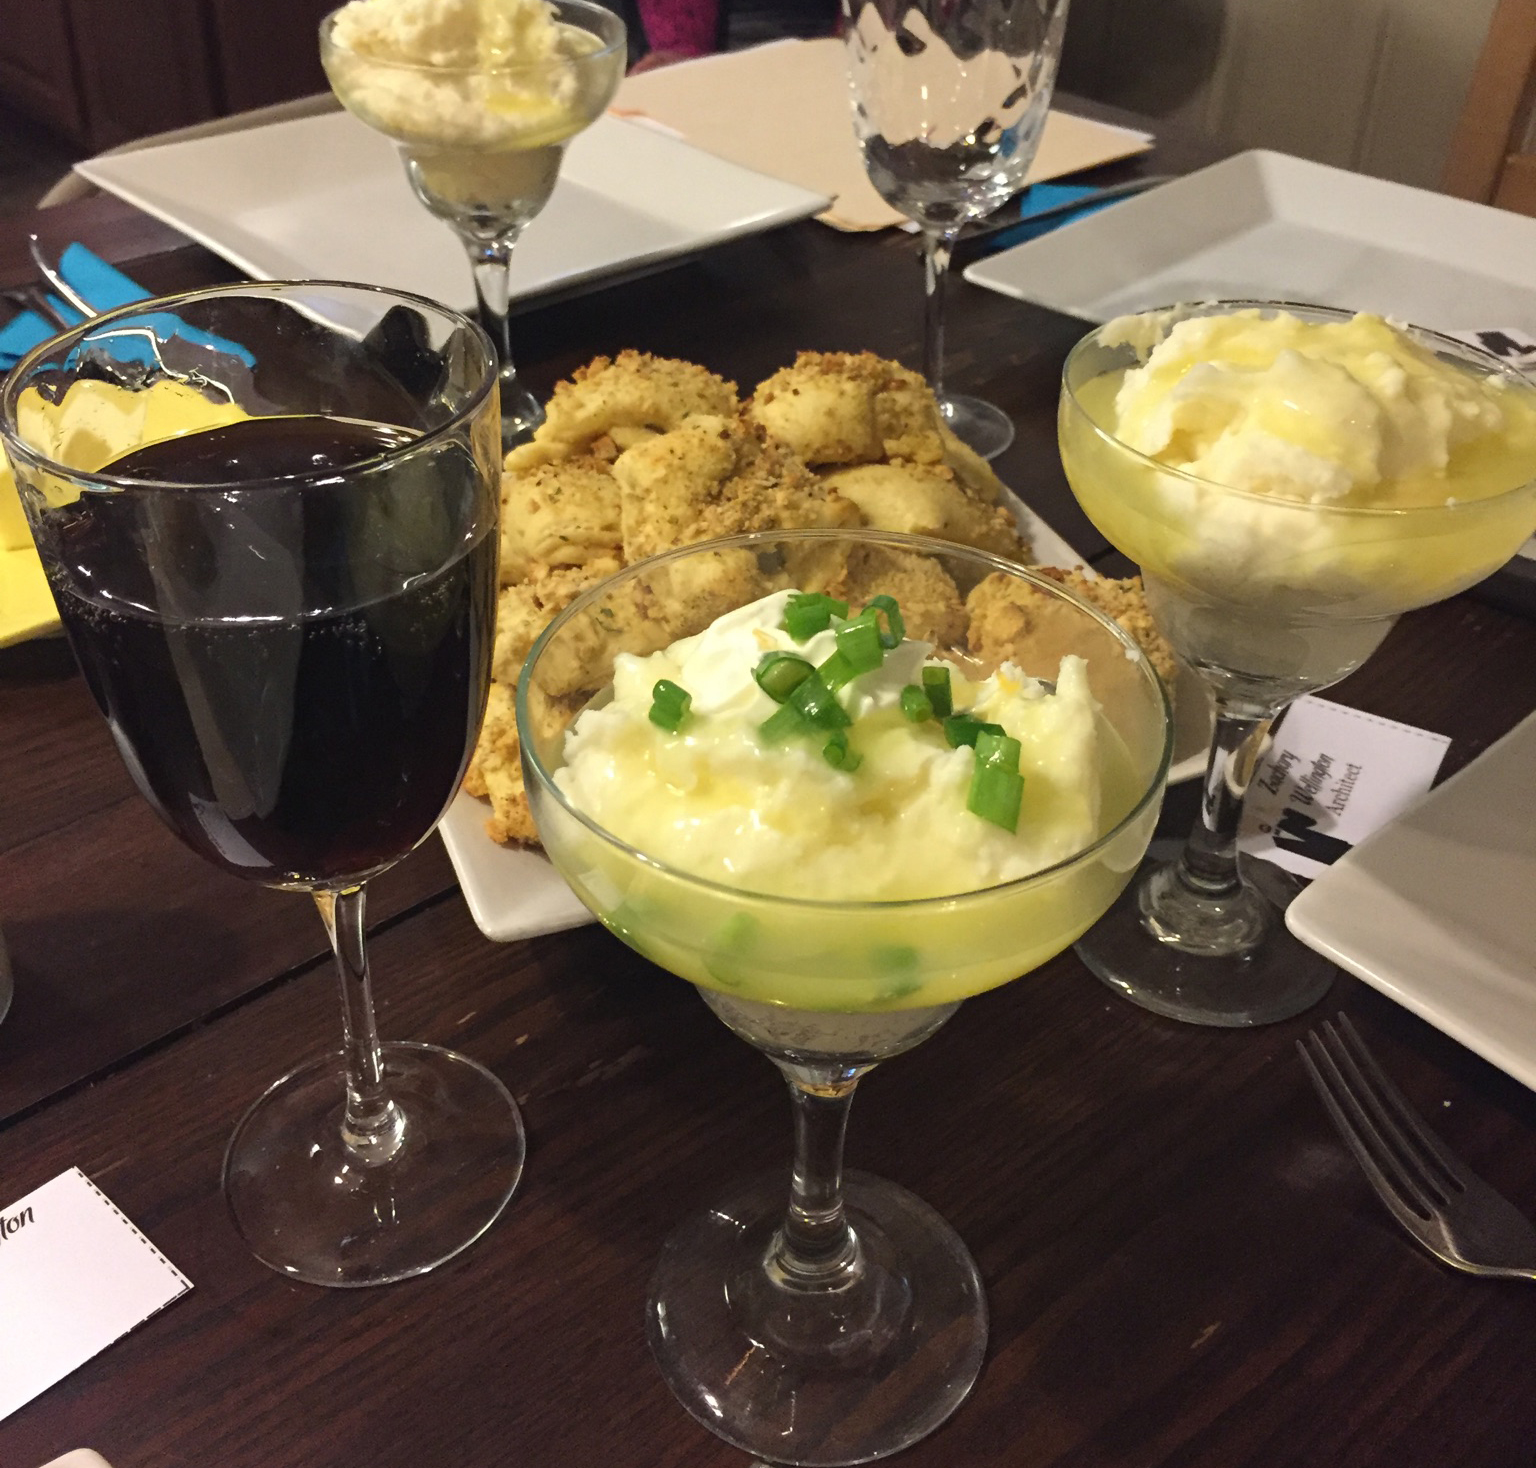 Mashed potato bar for murder mystery party